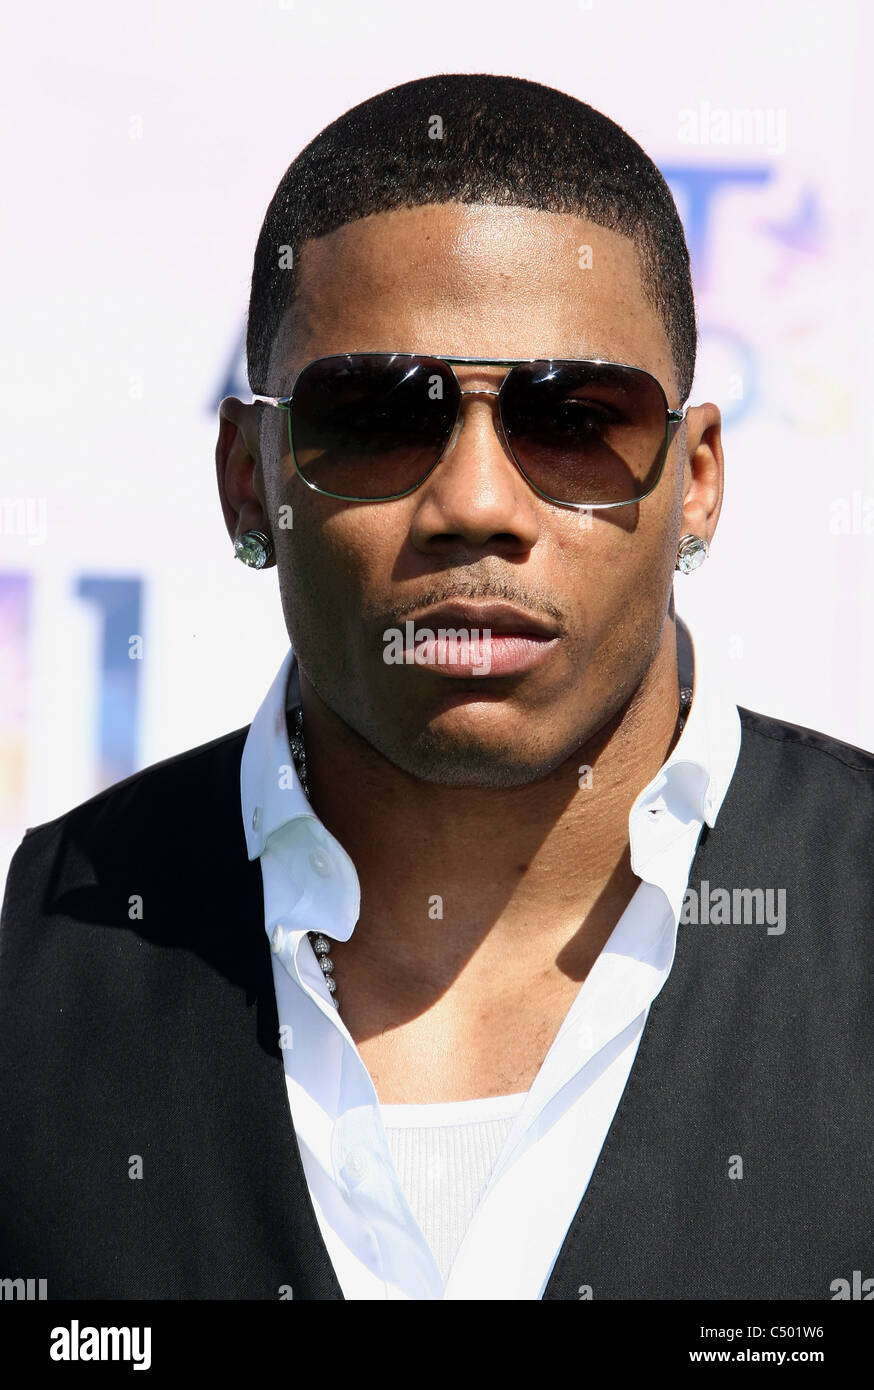 NELLY BET AWARDS 2011 ARRIVALS DOWNTOWN LOS ANGELES CALIFORNIA USA 26 June 2011 Stock Photo